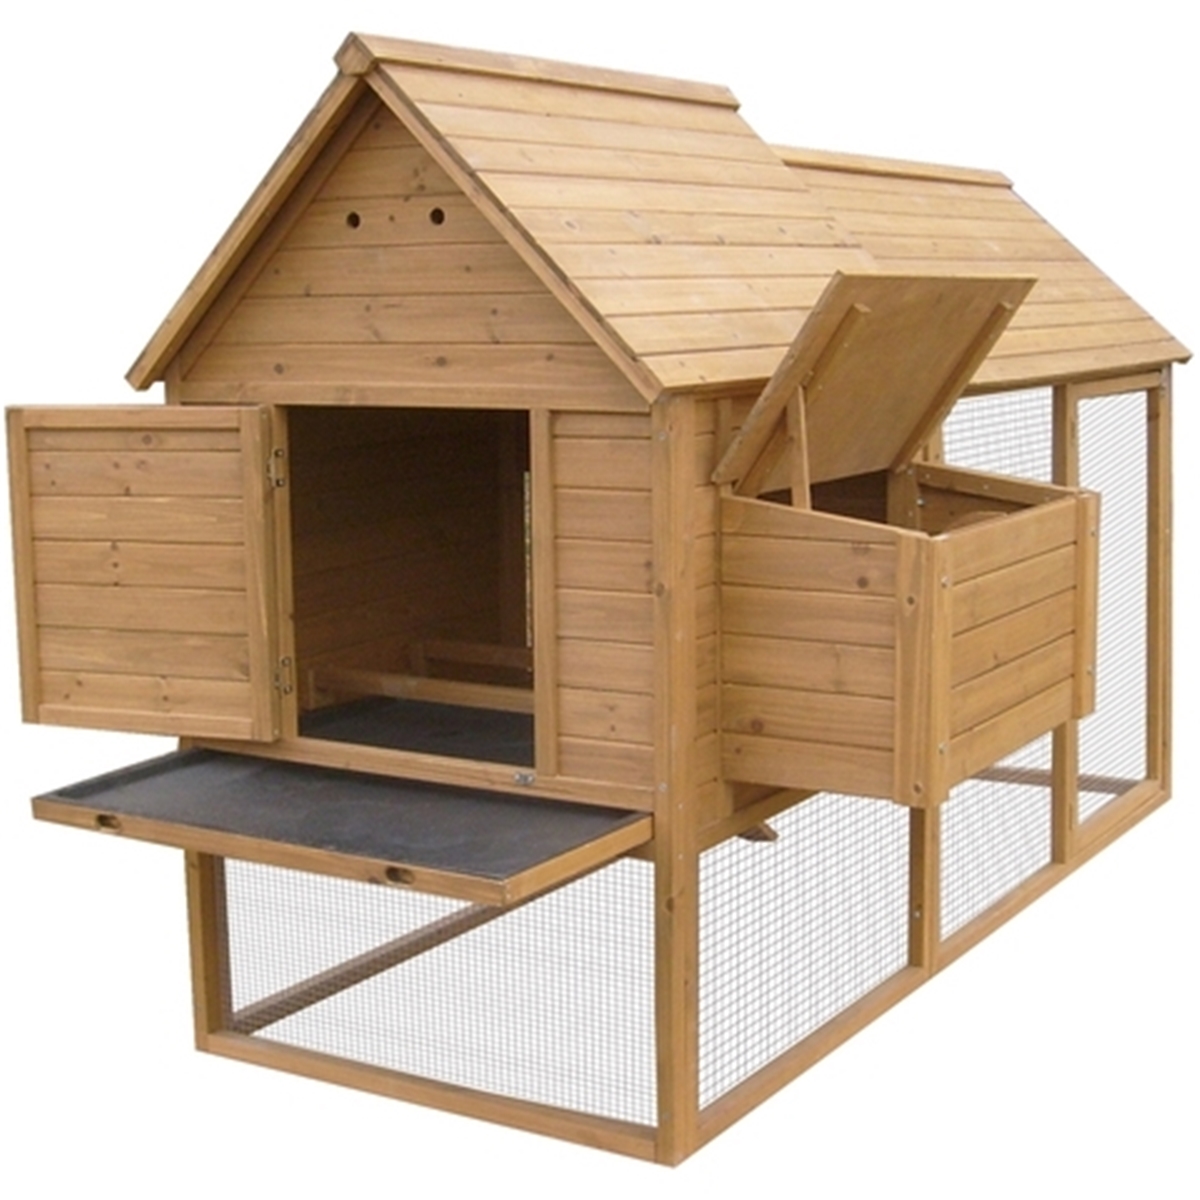 Chickens 'R' Great : WINCHESTER CHICKEN COOP + FREE RUN - HOUSES 6-8 